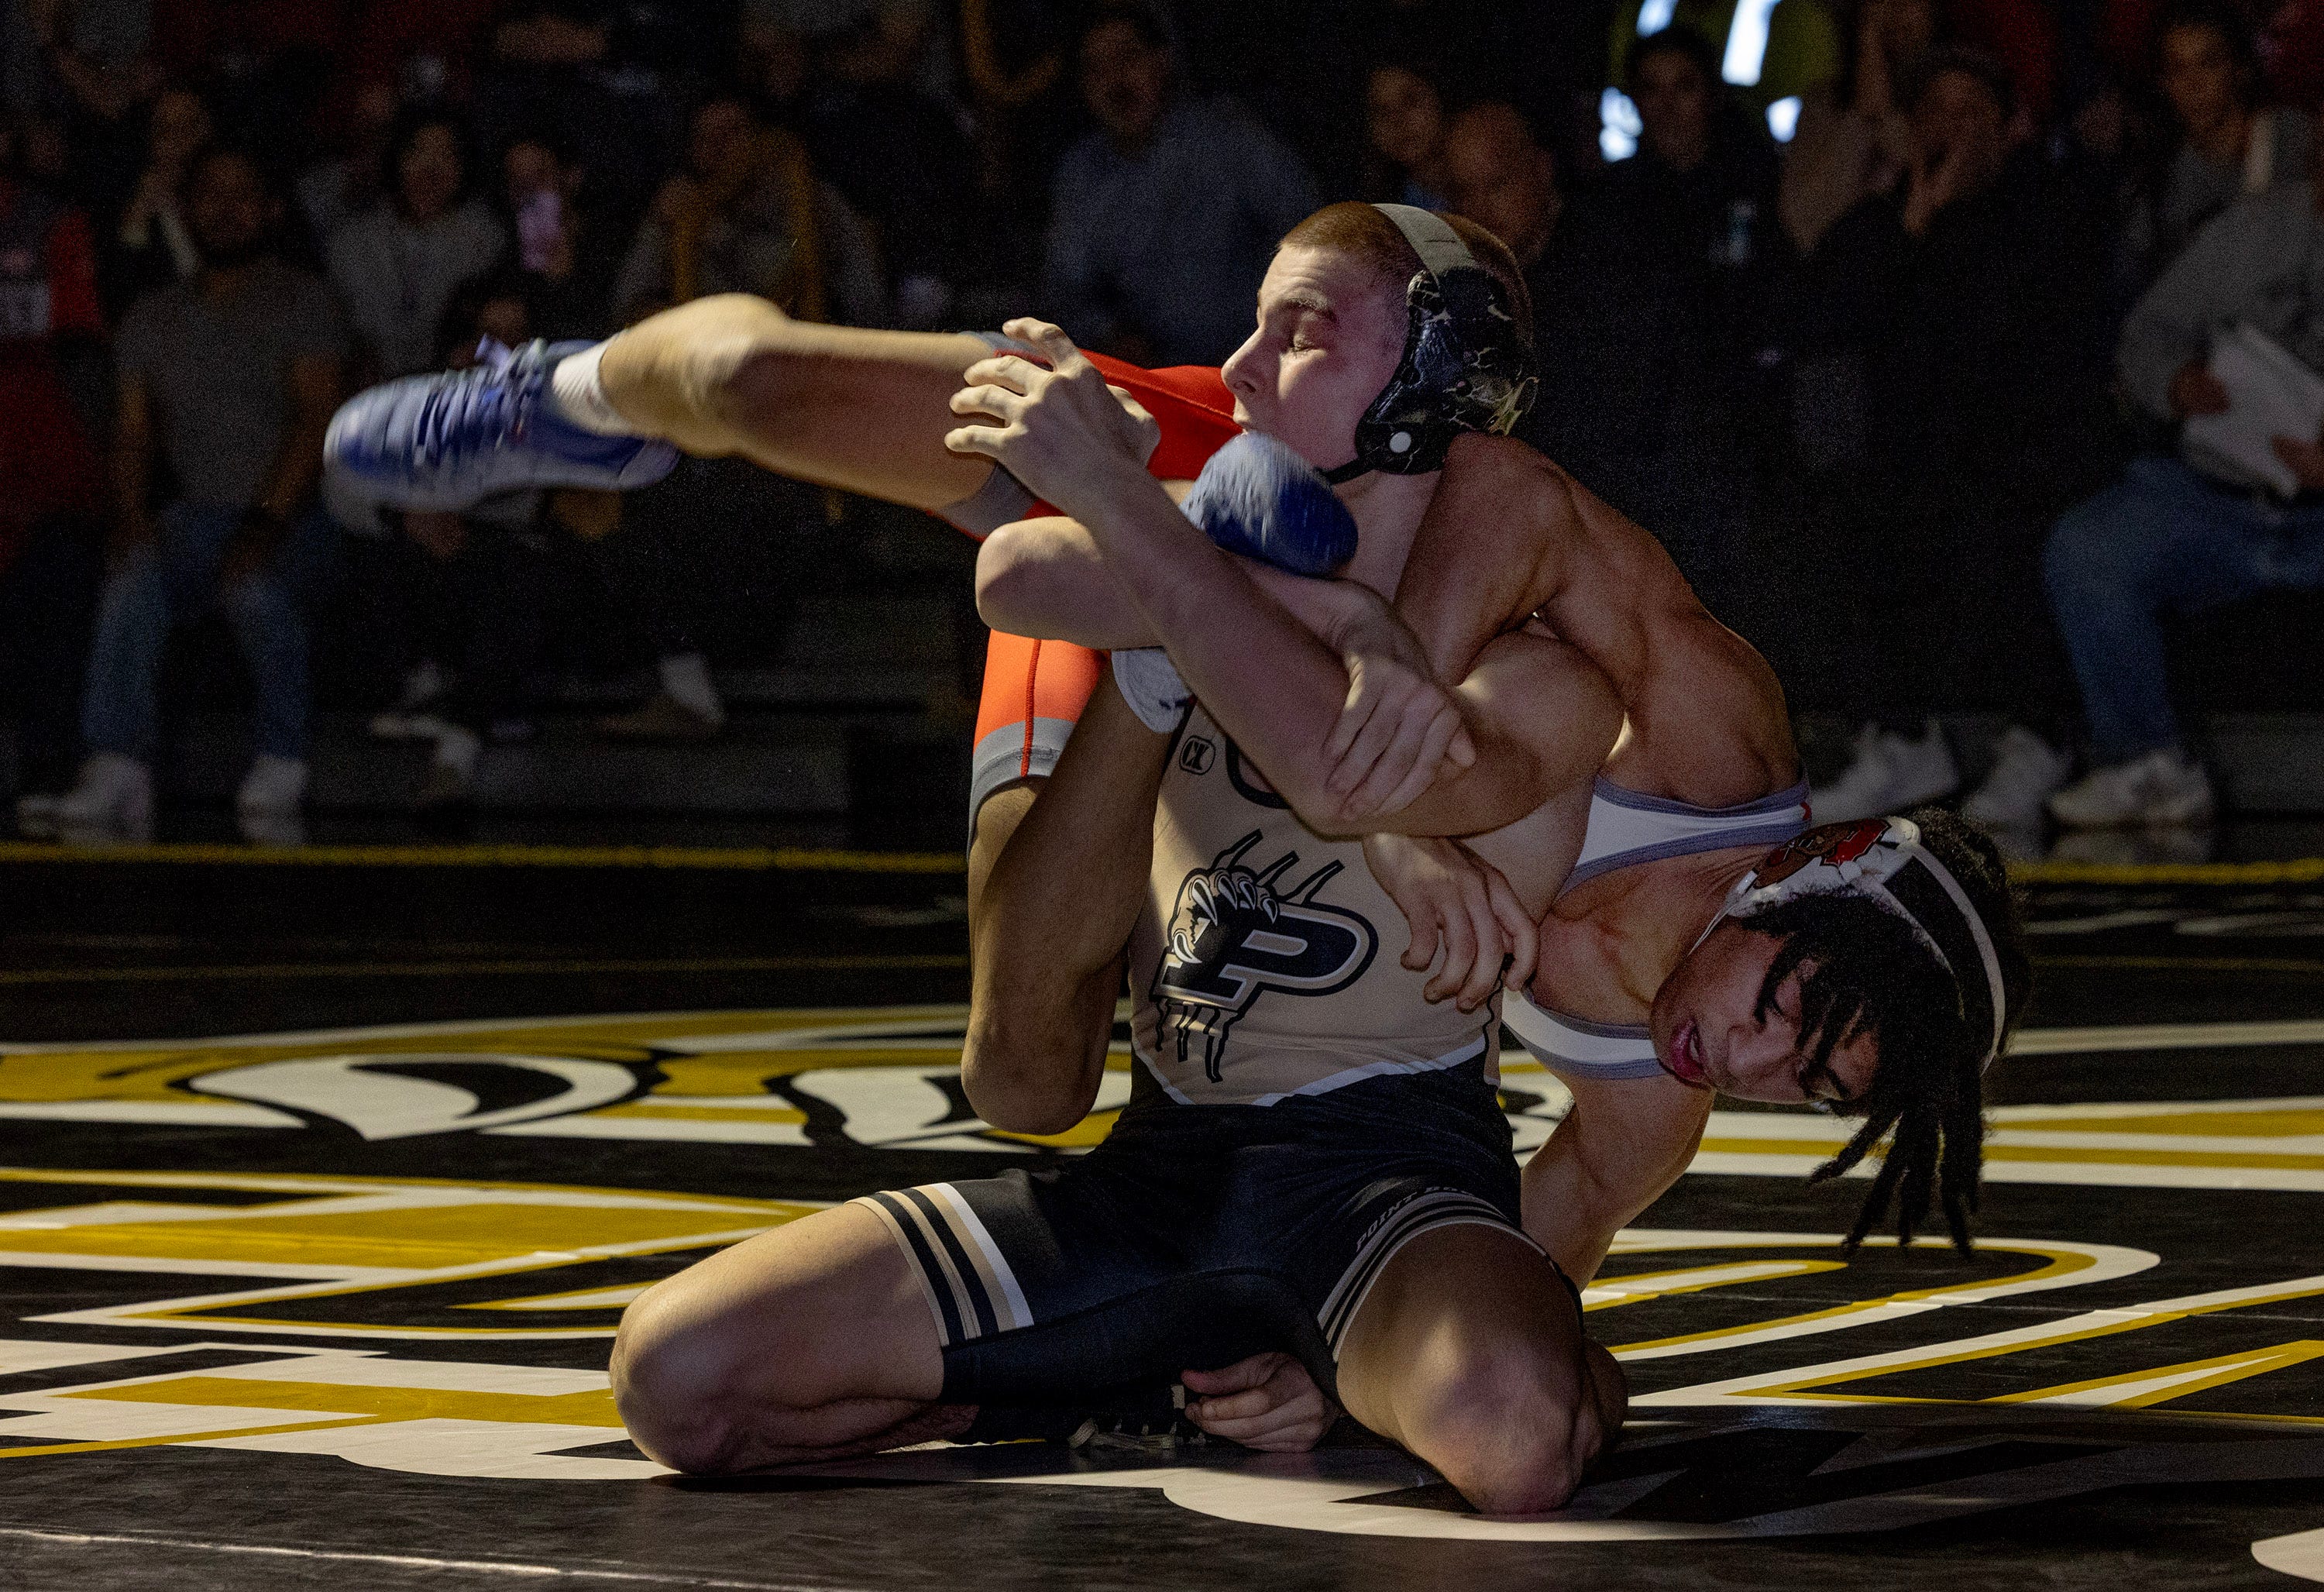 22 weights to watch in the njsiaa district wrestling tournaments for shore conference teams